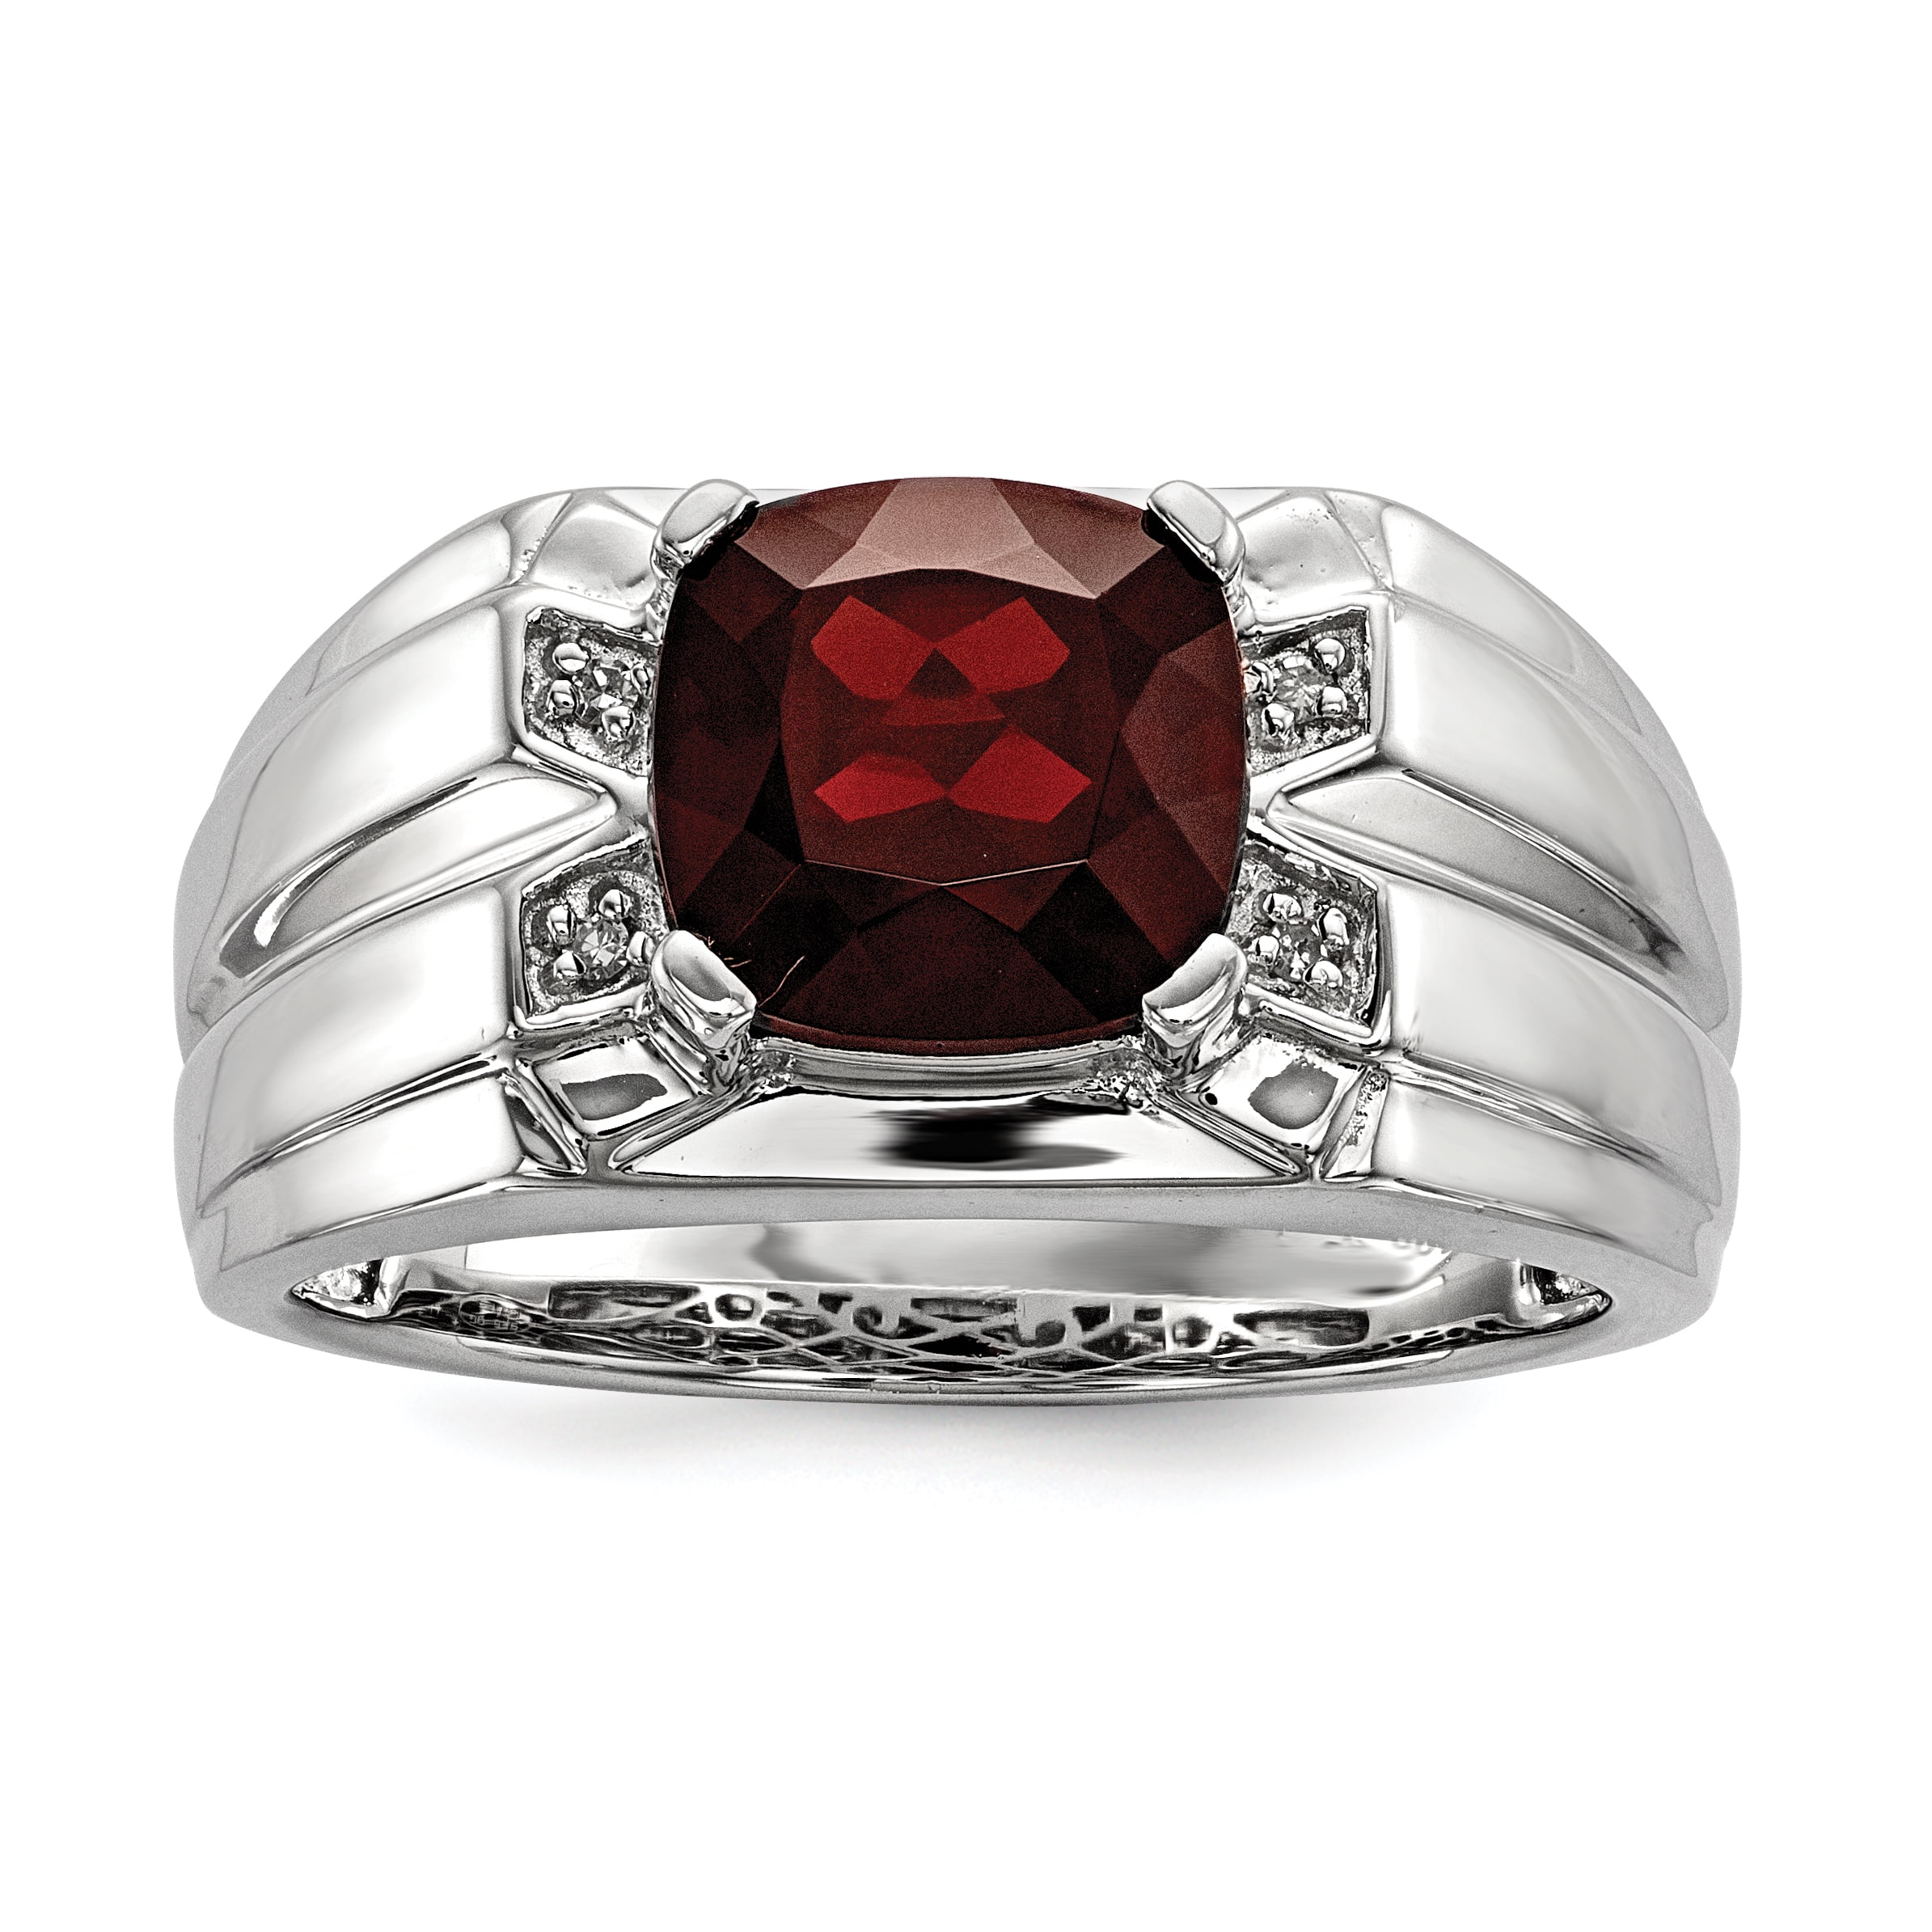 IceCarats 925 Sterling Silver Rhod Plated Red Diamond Square